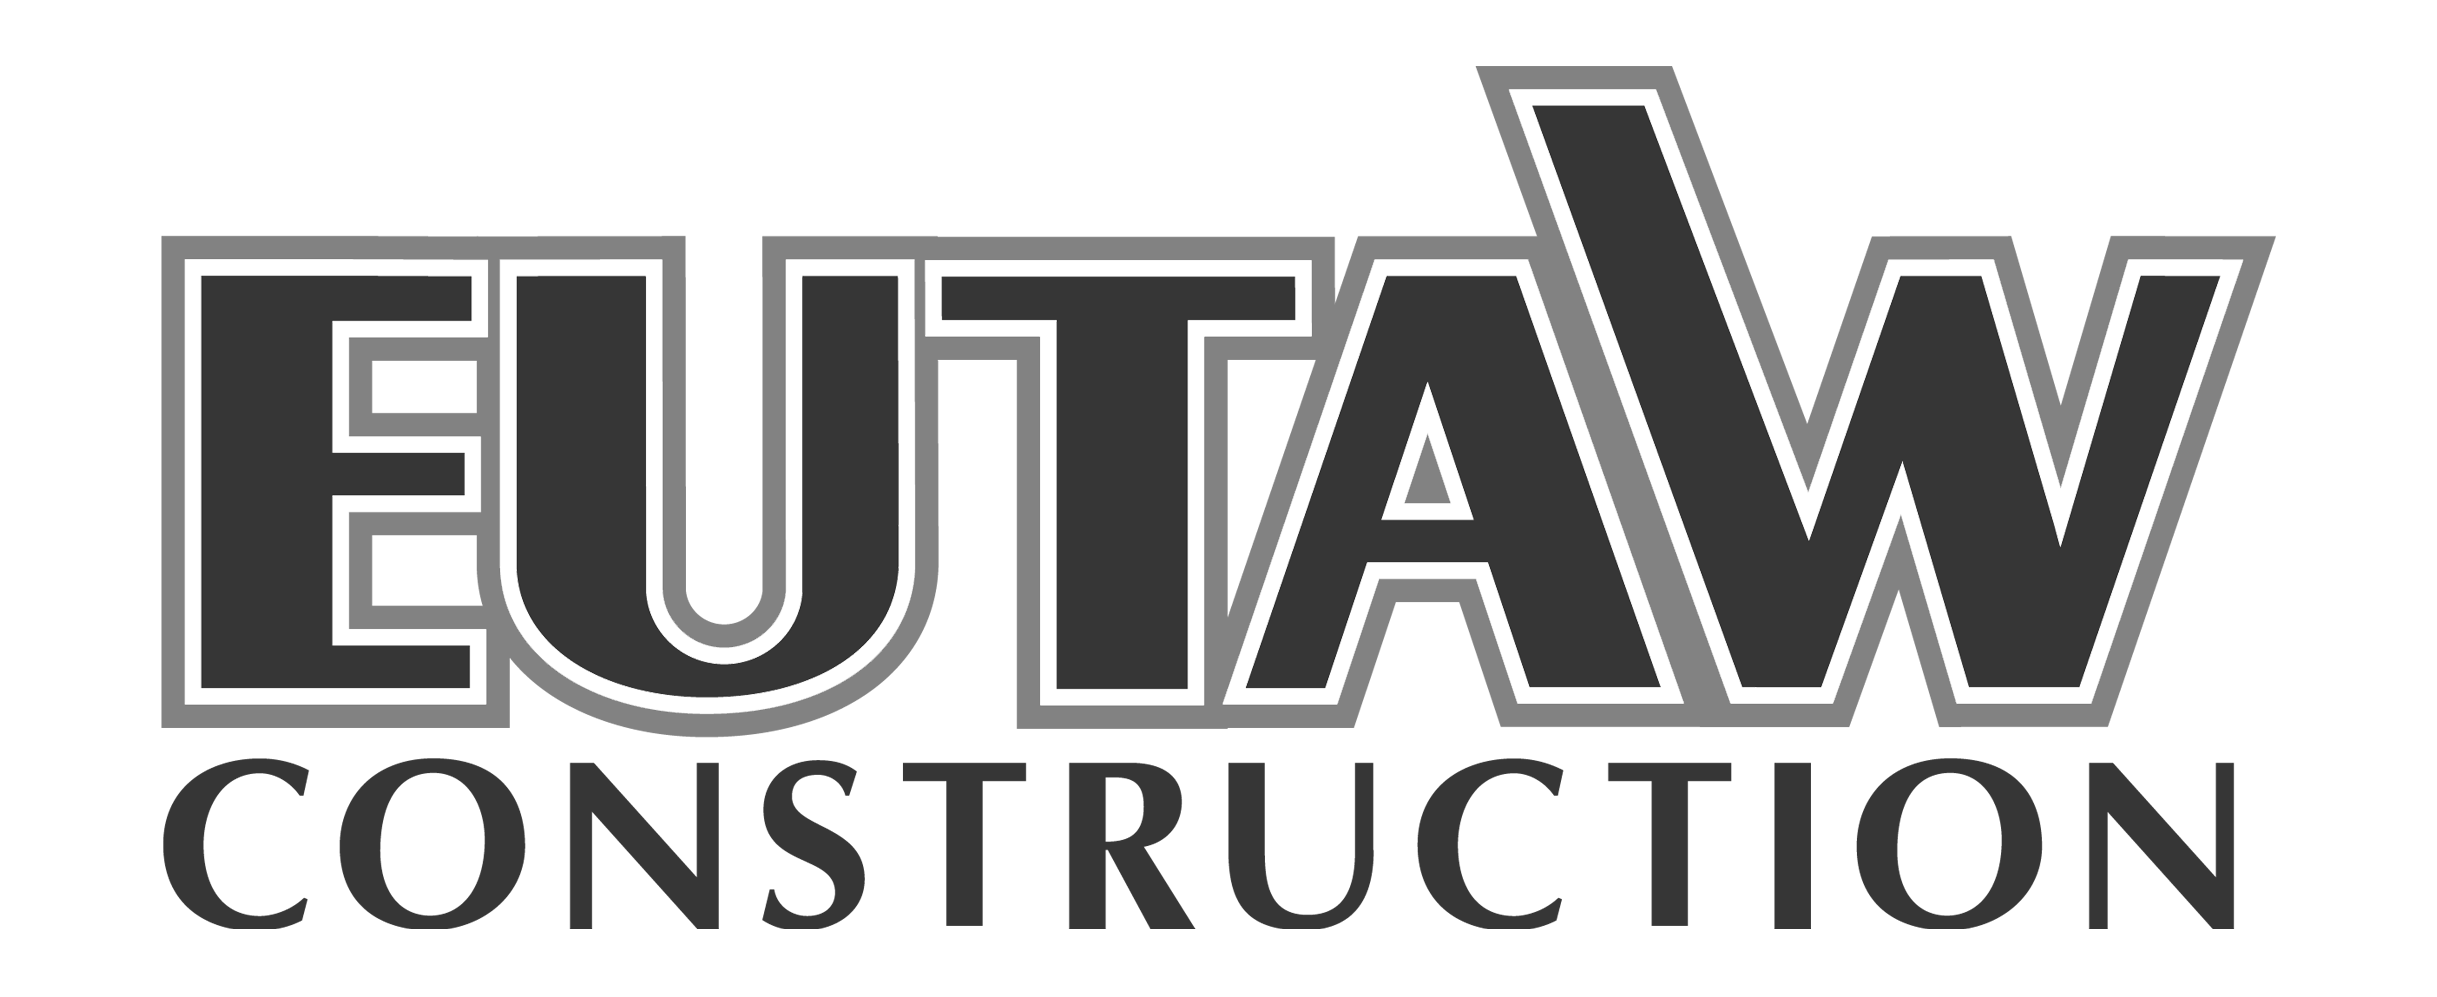 Eutaw-Construction-New-Logo-2021.11.03.png